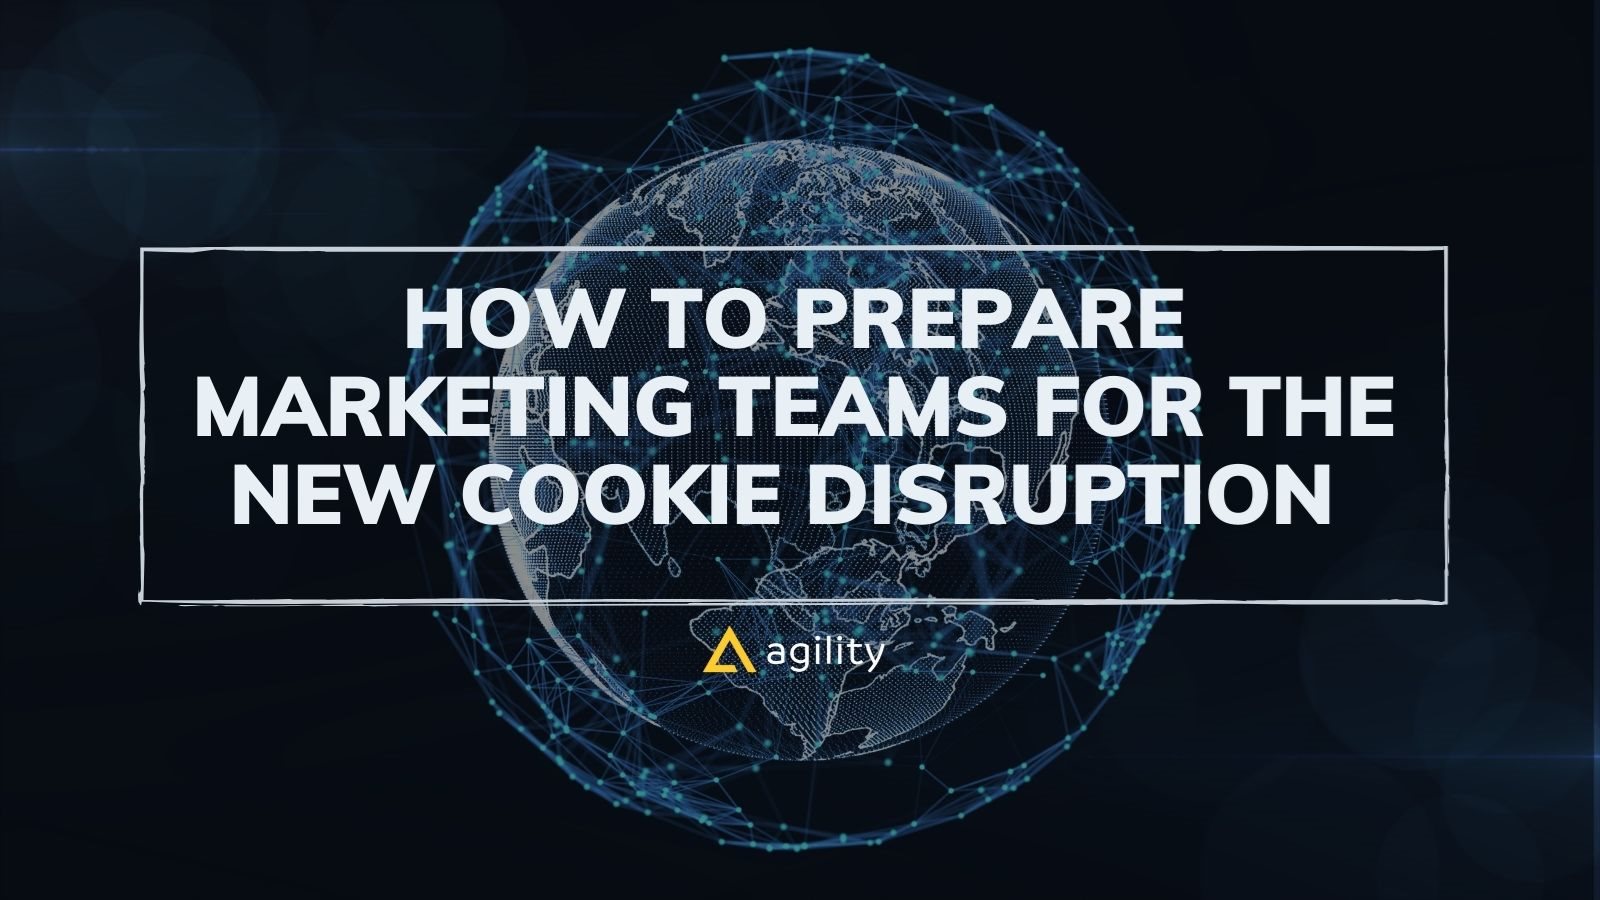 How to Prepare Marketing Teams for the New Cookie Disruption